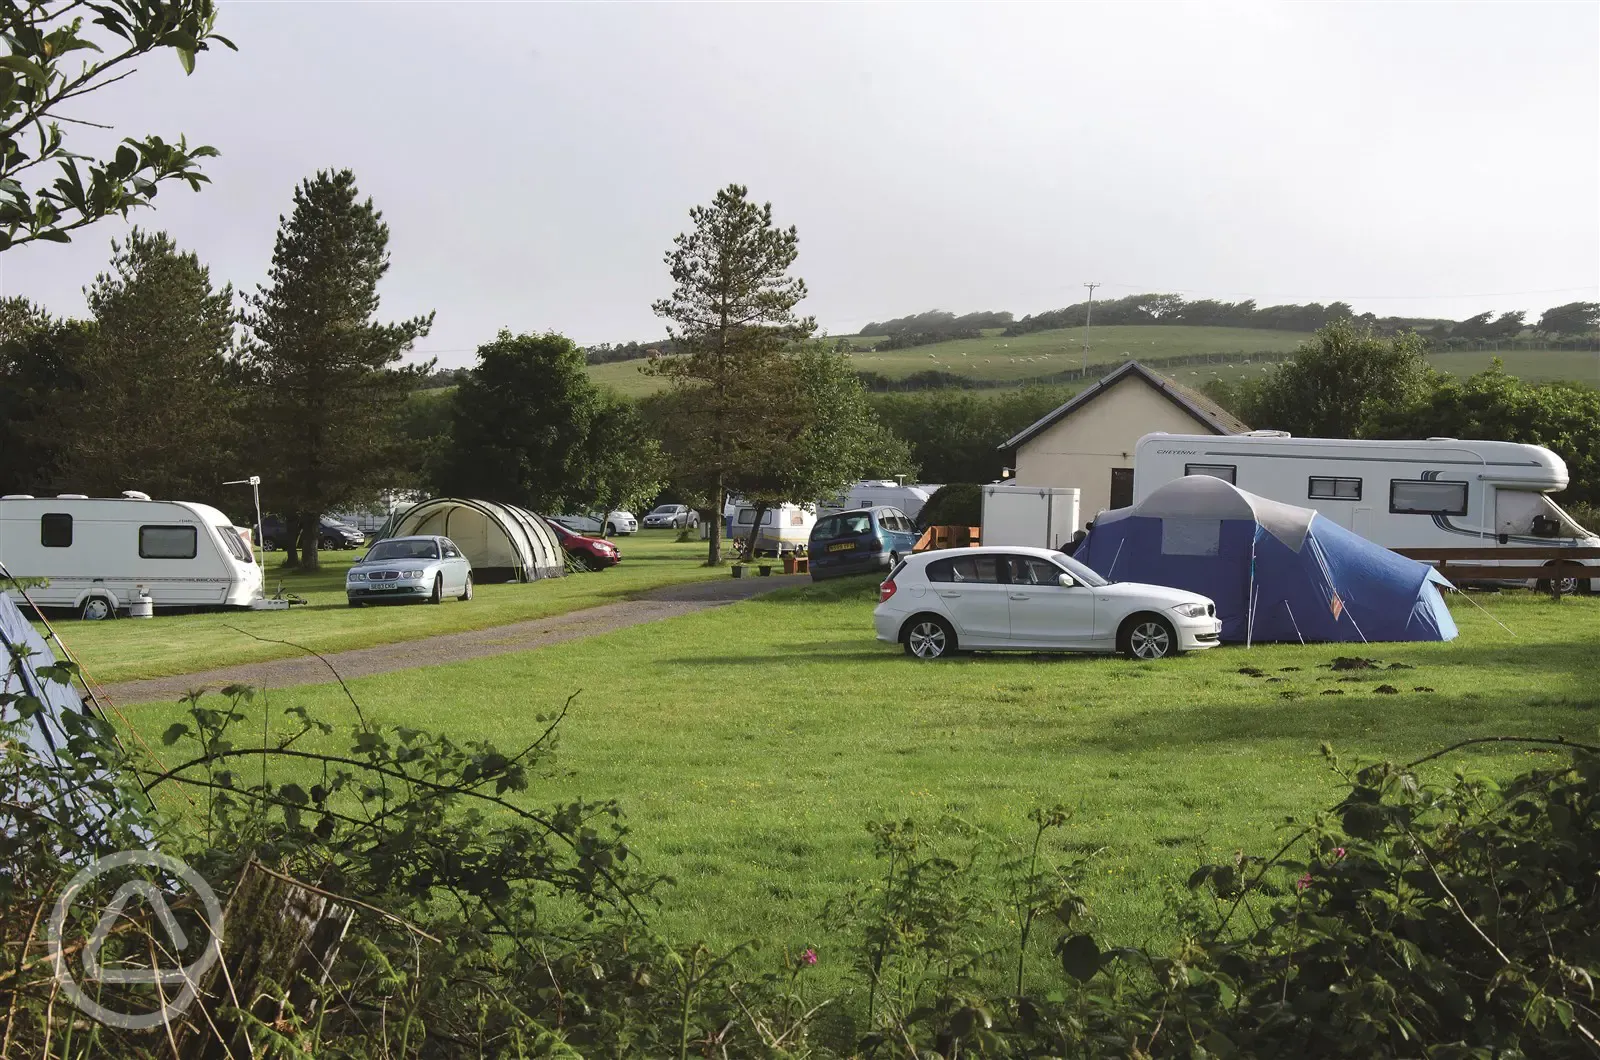 Campsite Electricity - The Camping and Caravanning Club